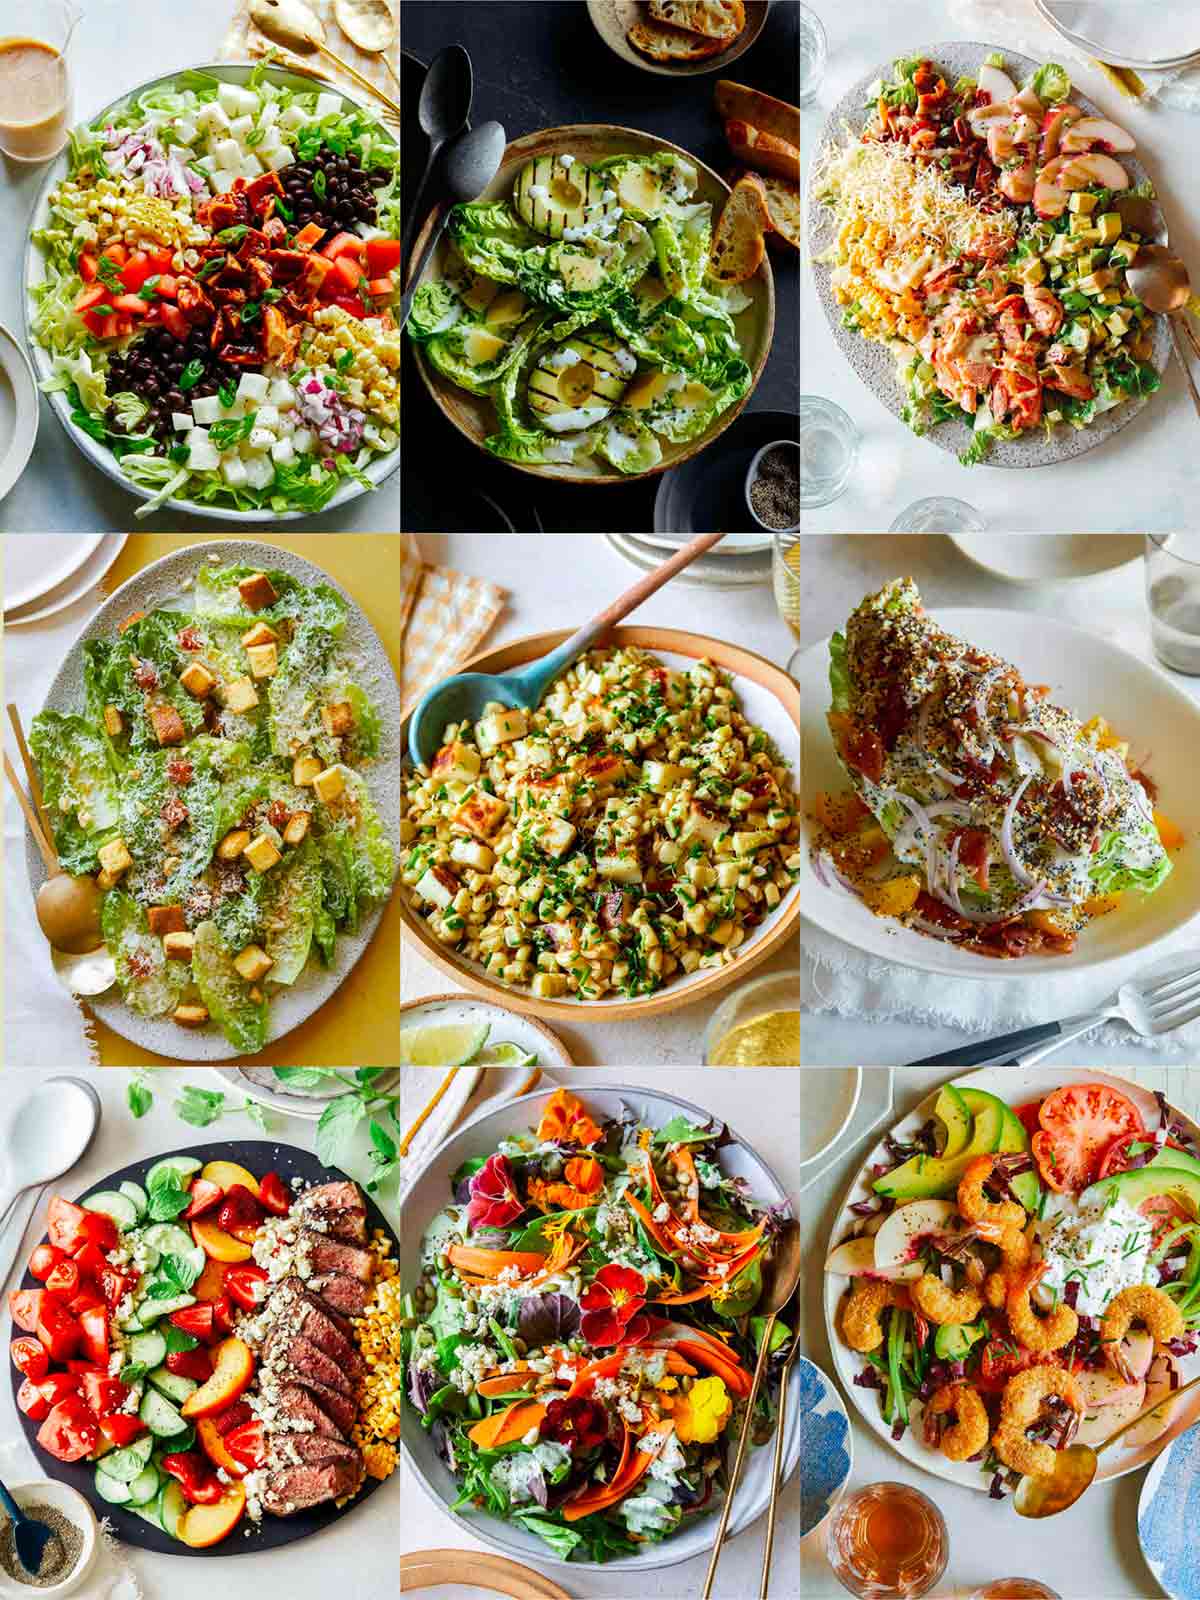 Salad recipes for dinner and for sides! 